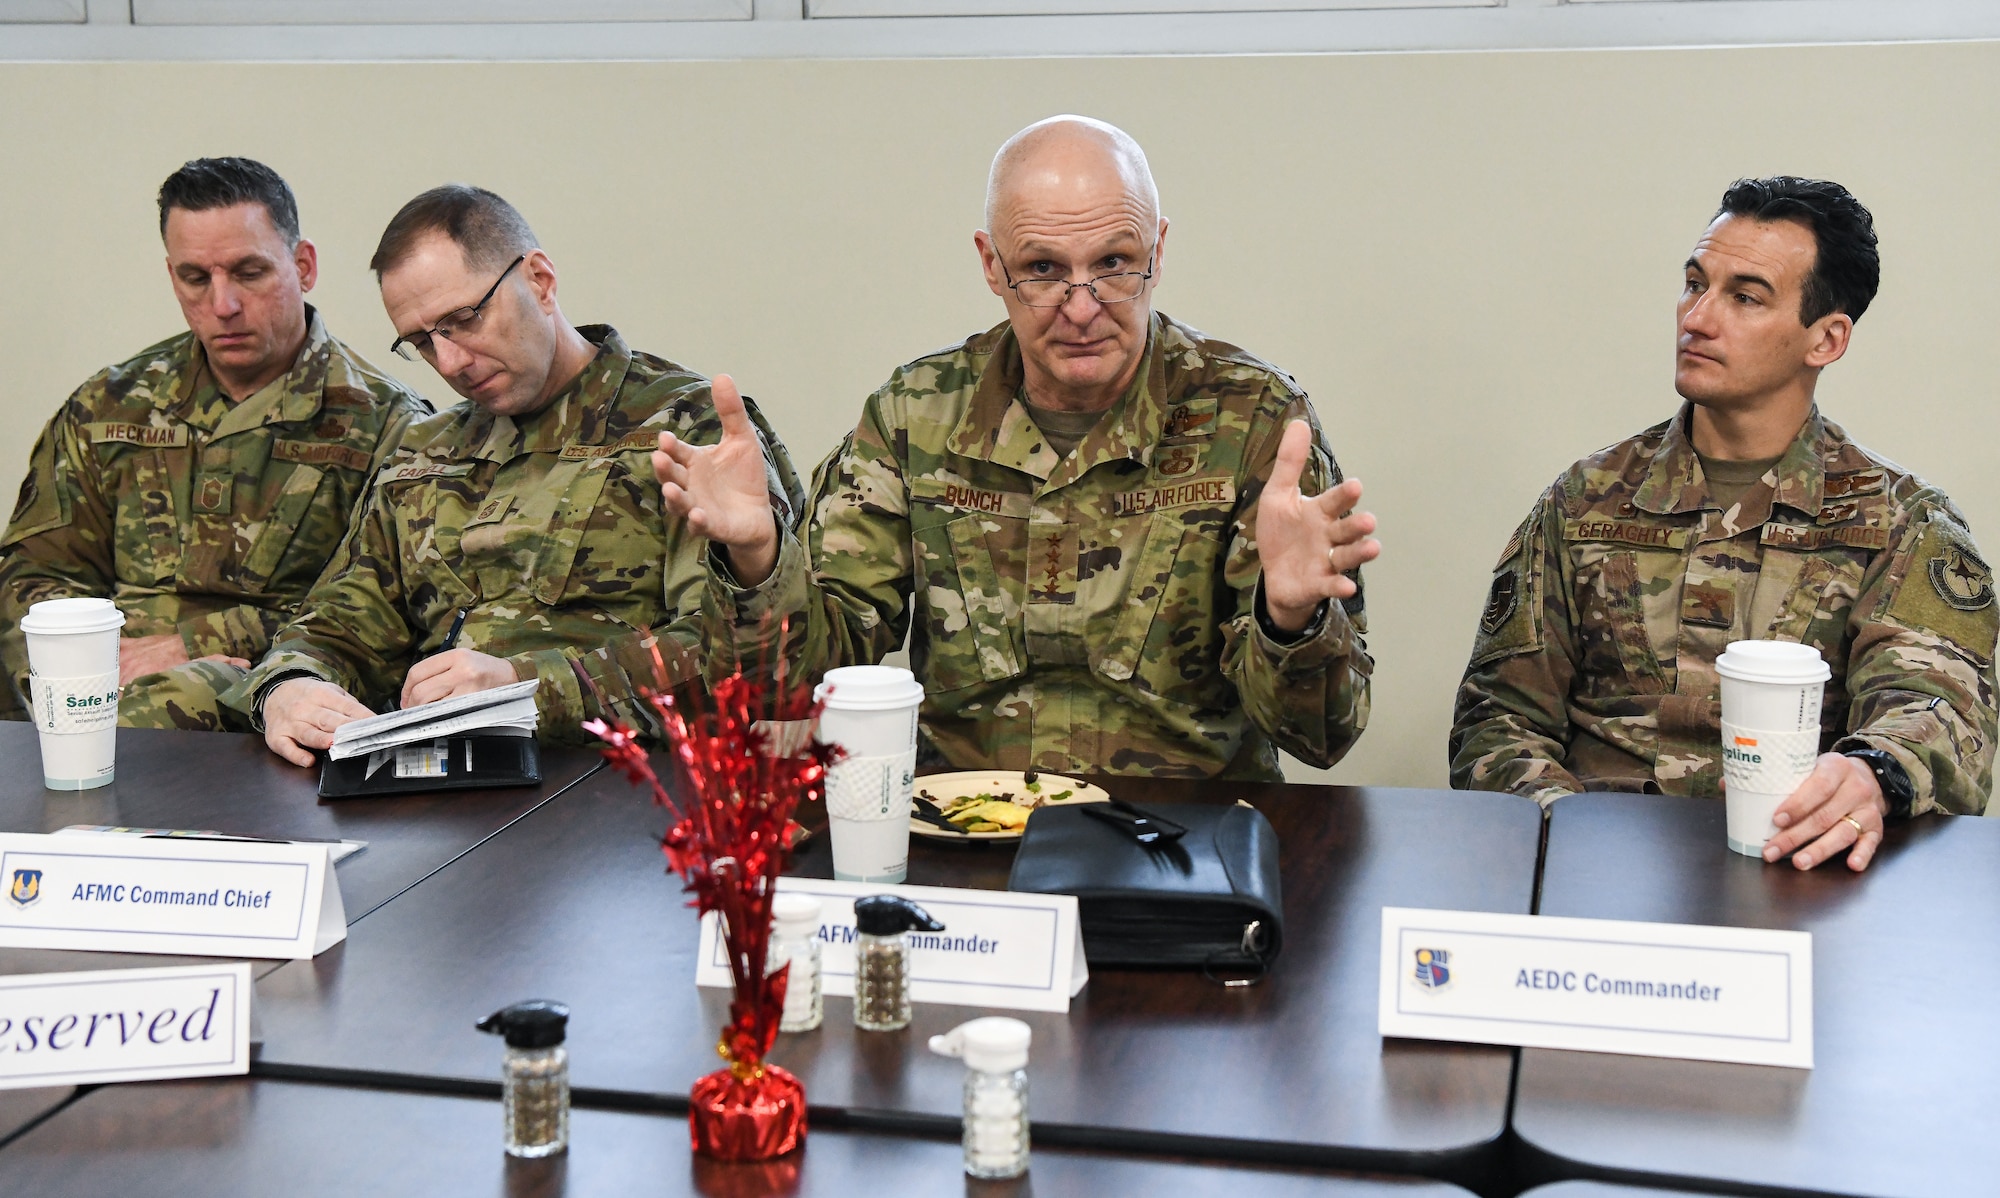 Gen. Arnold W. Bunch, Jr., commander, Air Force Materiel Command (AFMC), fields questions during a breakfast with Arnold Engineering Development Complex (AEDC) team members, Feb. 7, 2020, at Arnold Air Force Base, Tenn. Also pictured are Chief Master Sgt. Robert Heckman, from left, superintendent of AEDC; Chief Master Sgt. Stanley Cadell, command chief, Air Force Materiel Command; and Col. Jeffrey Geraghty, commander of AEDC. (U.S. Air Force photo by Jill Pickett)